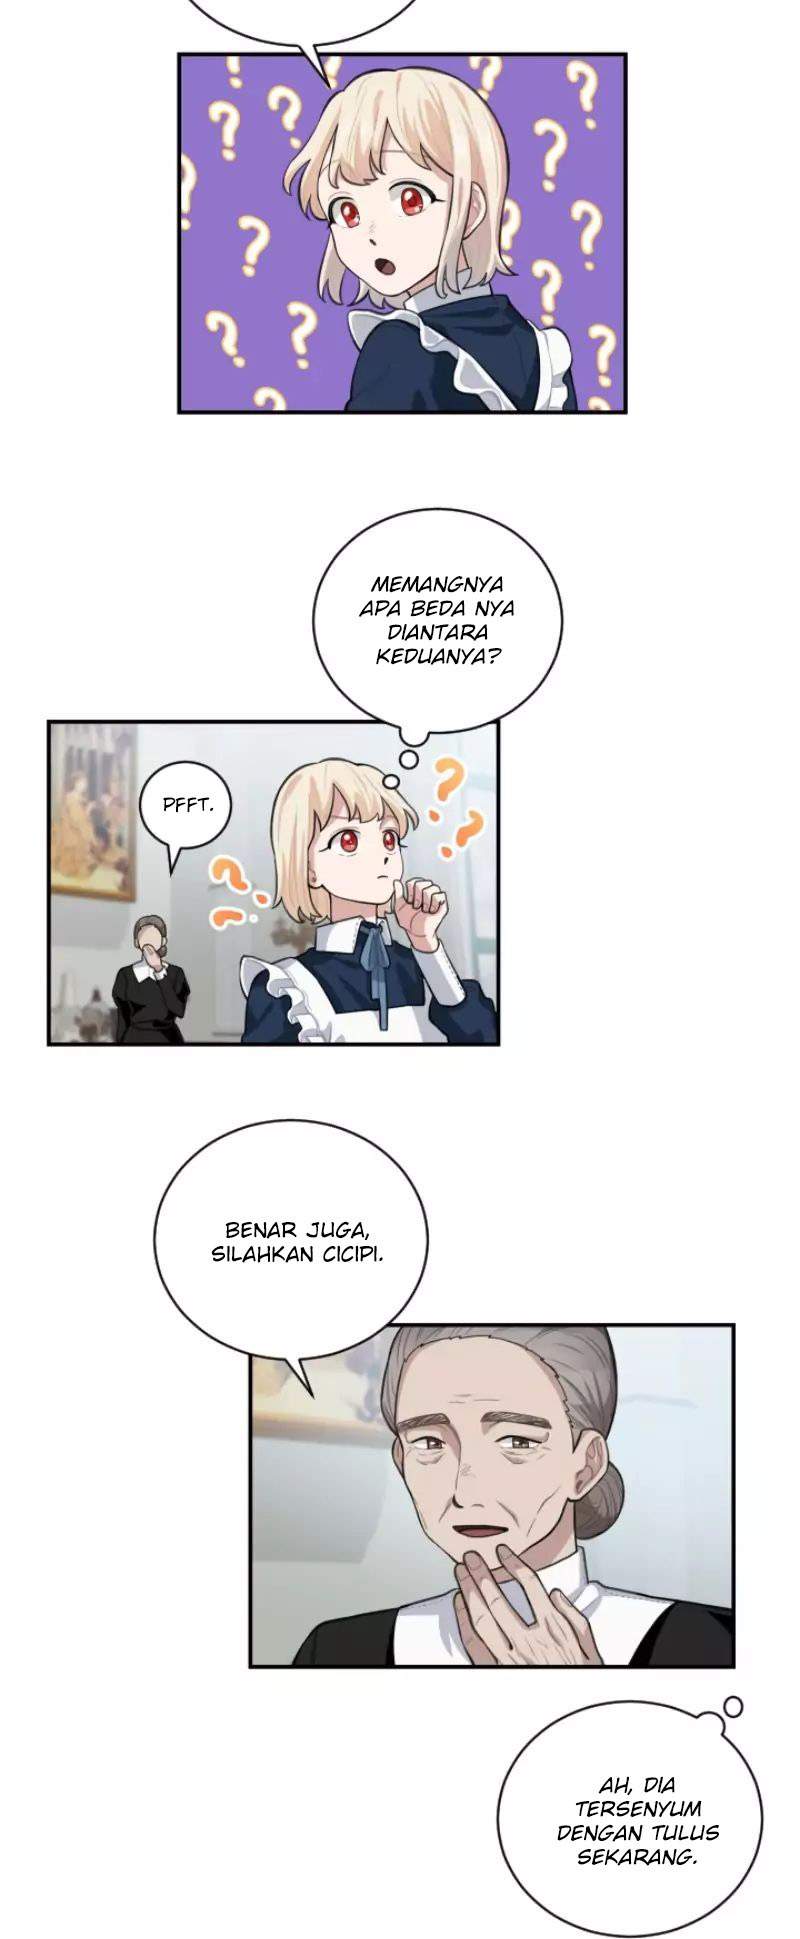 I Became a Maid in a TL Novel Chapter 06